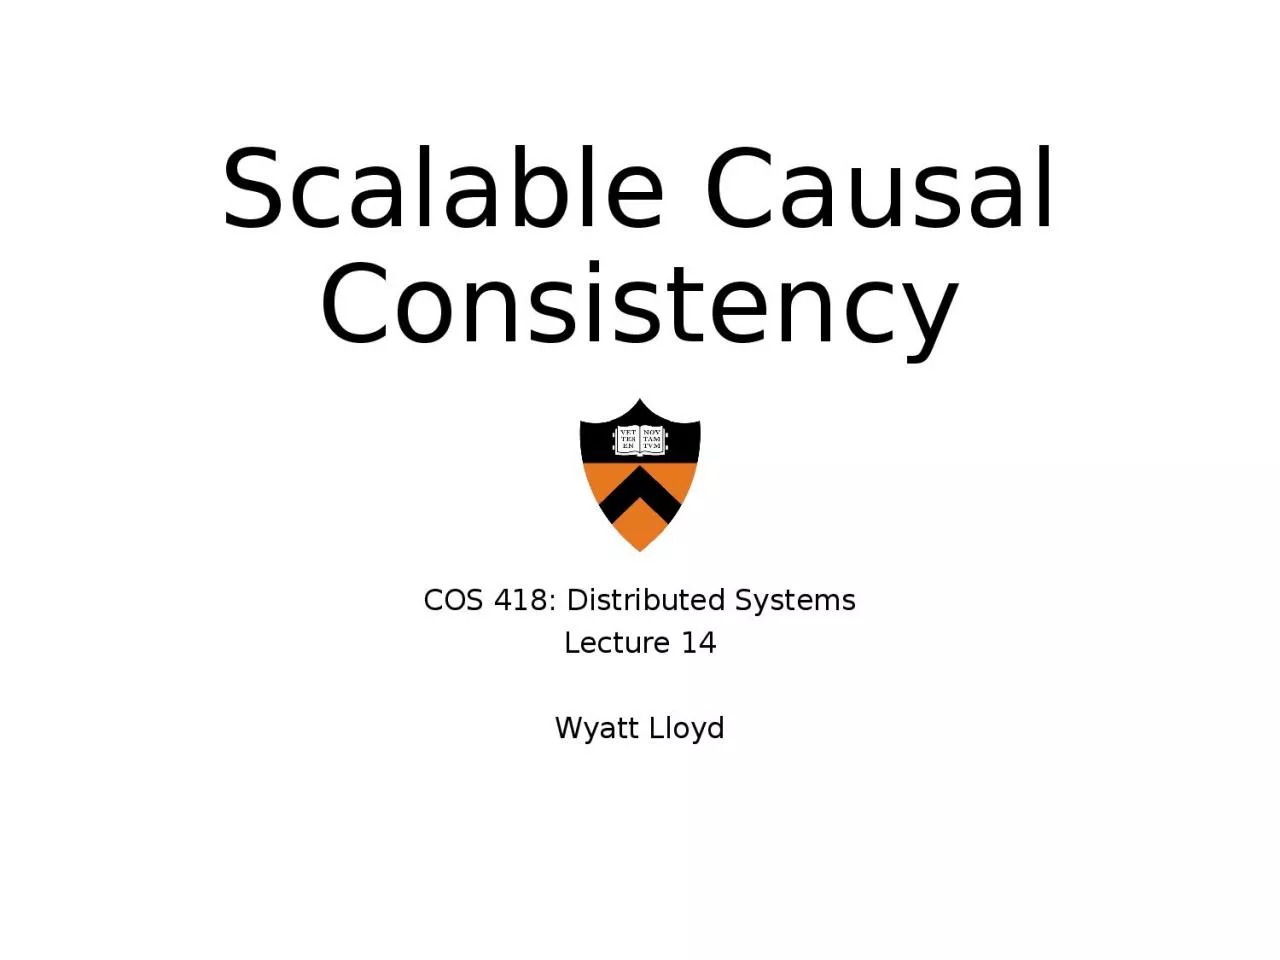 Scalable Causal Consistency